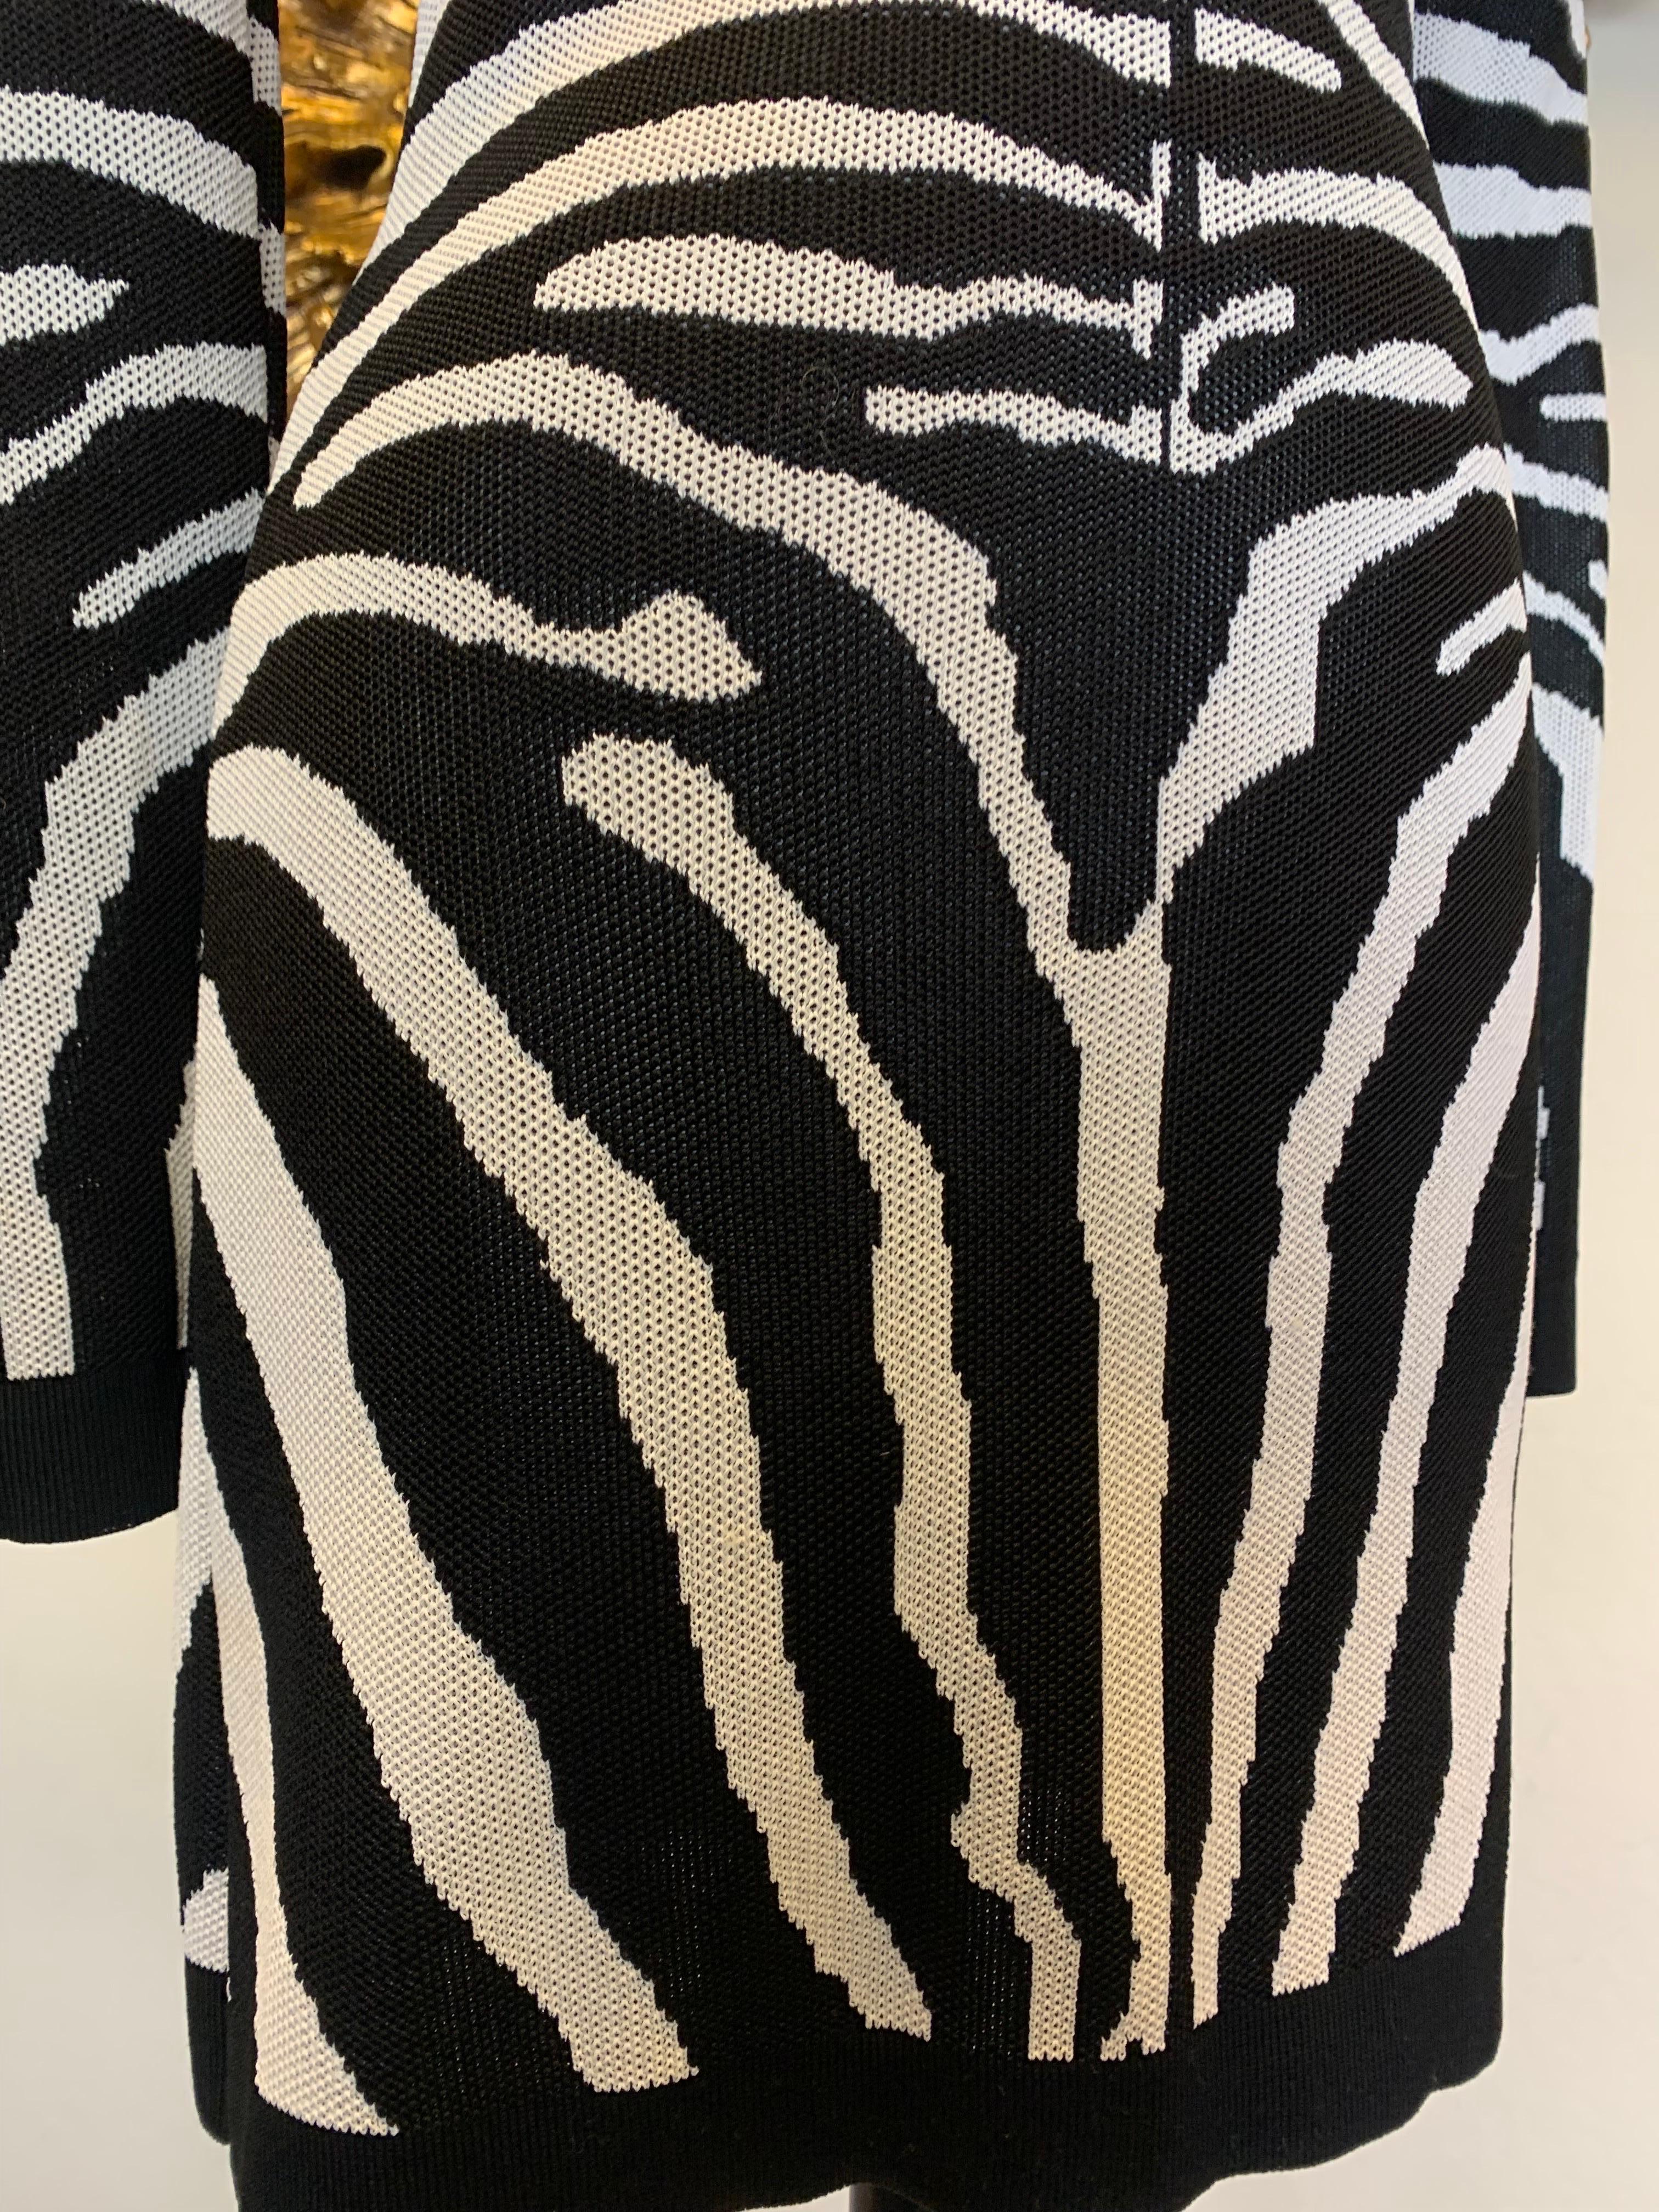 Contemporary Balmain Power Mesh Knit Zebra Patterned Mini Dress  In Excellent Condition For Sale In Gresham, OR